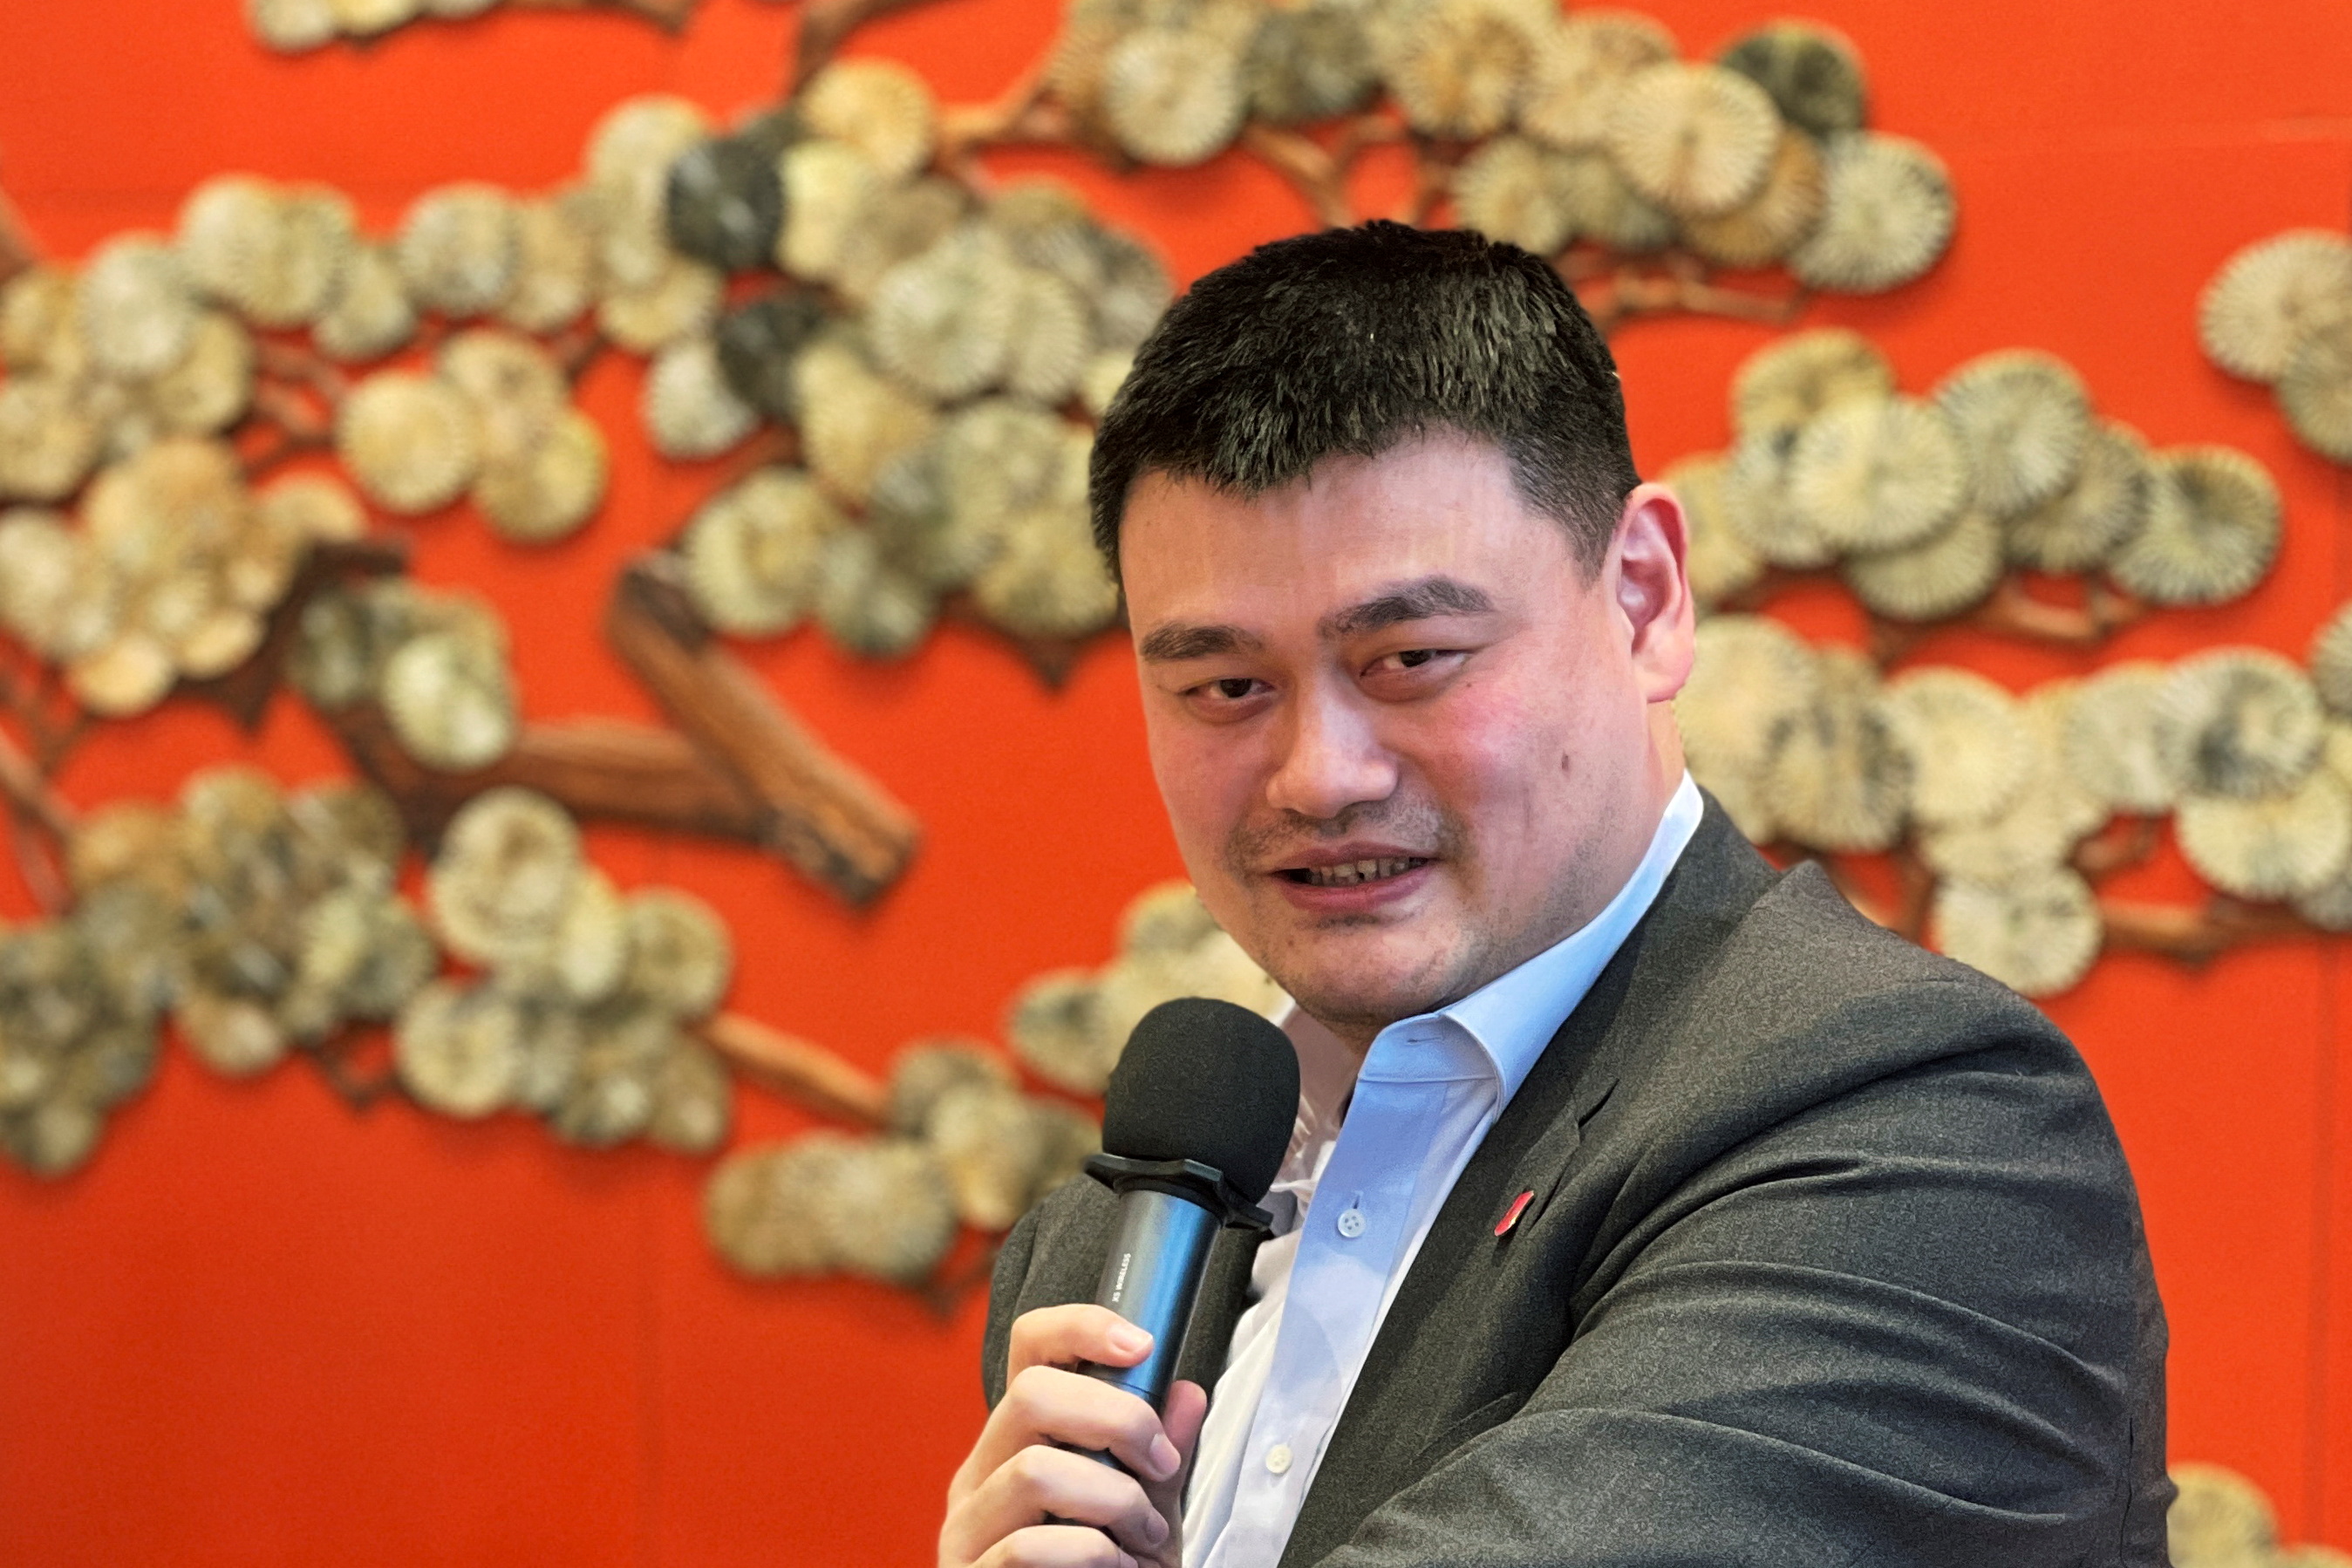 President of Chinese Basketball Association and Ice and Snow Sports Promotion Ambassador Yao Ming attends a media event ahead of the Beijing 2022 Winter Olympics in Beijing, China January 17, 2022. REUTERS/Yew Lun Tian